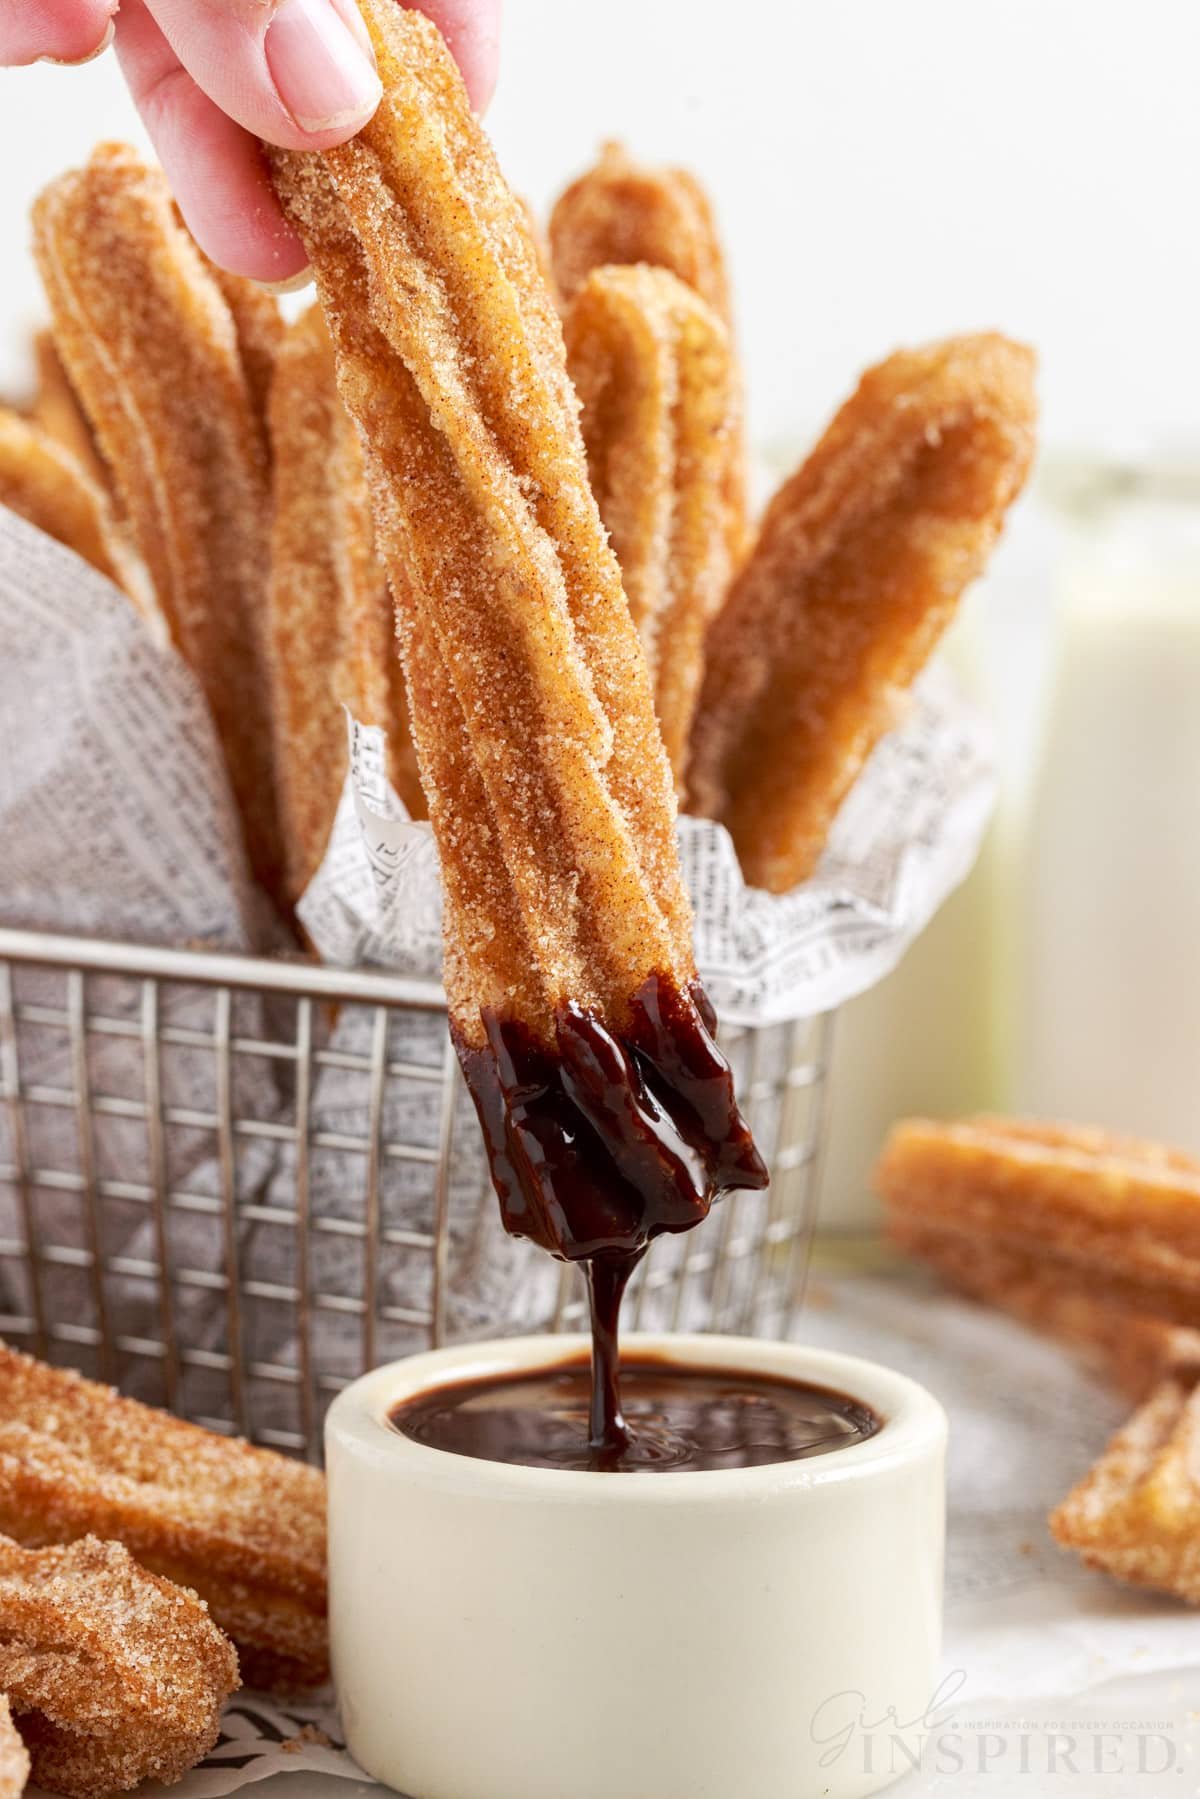 A Churro after being dipped in a small dish of chocolate, a wire basket in the background of Churros.